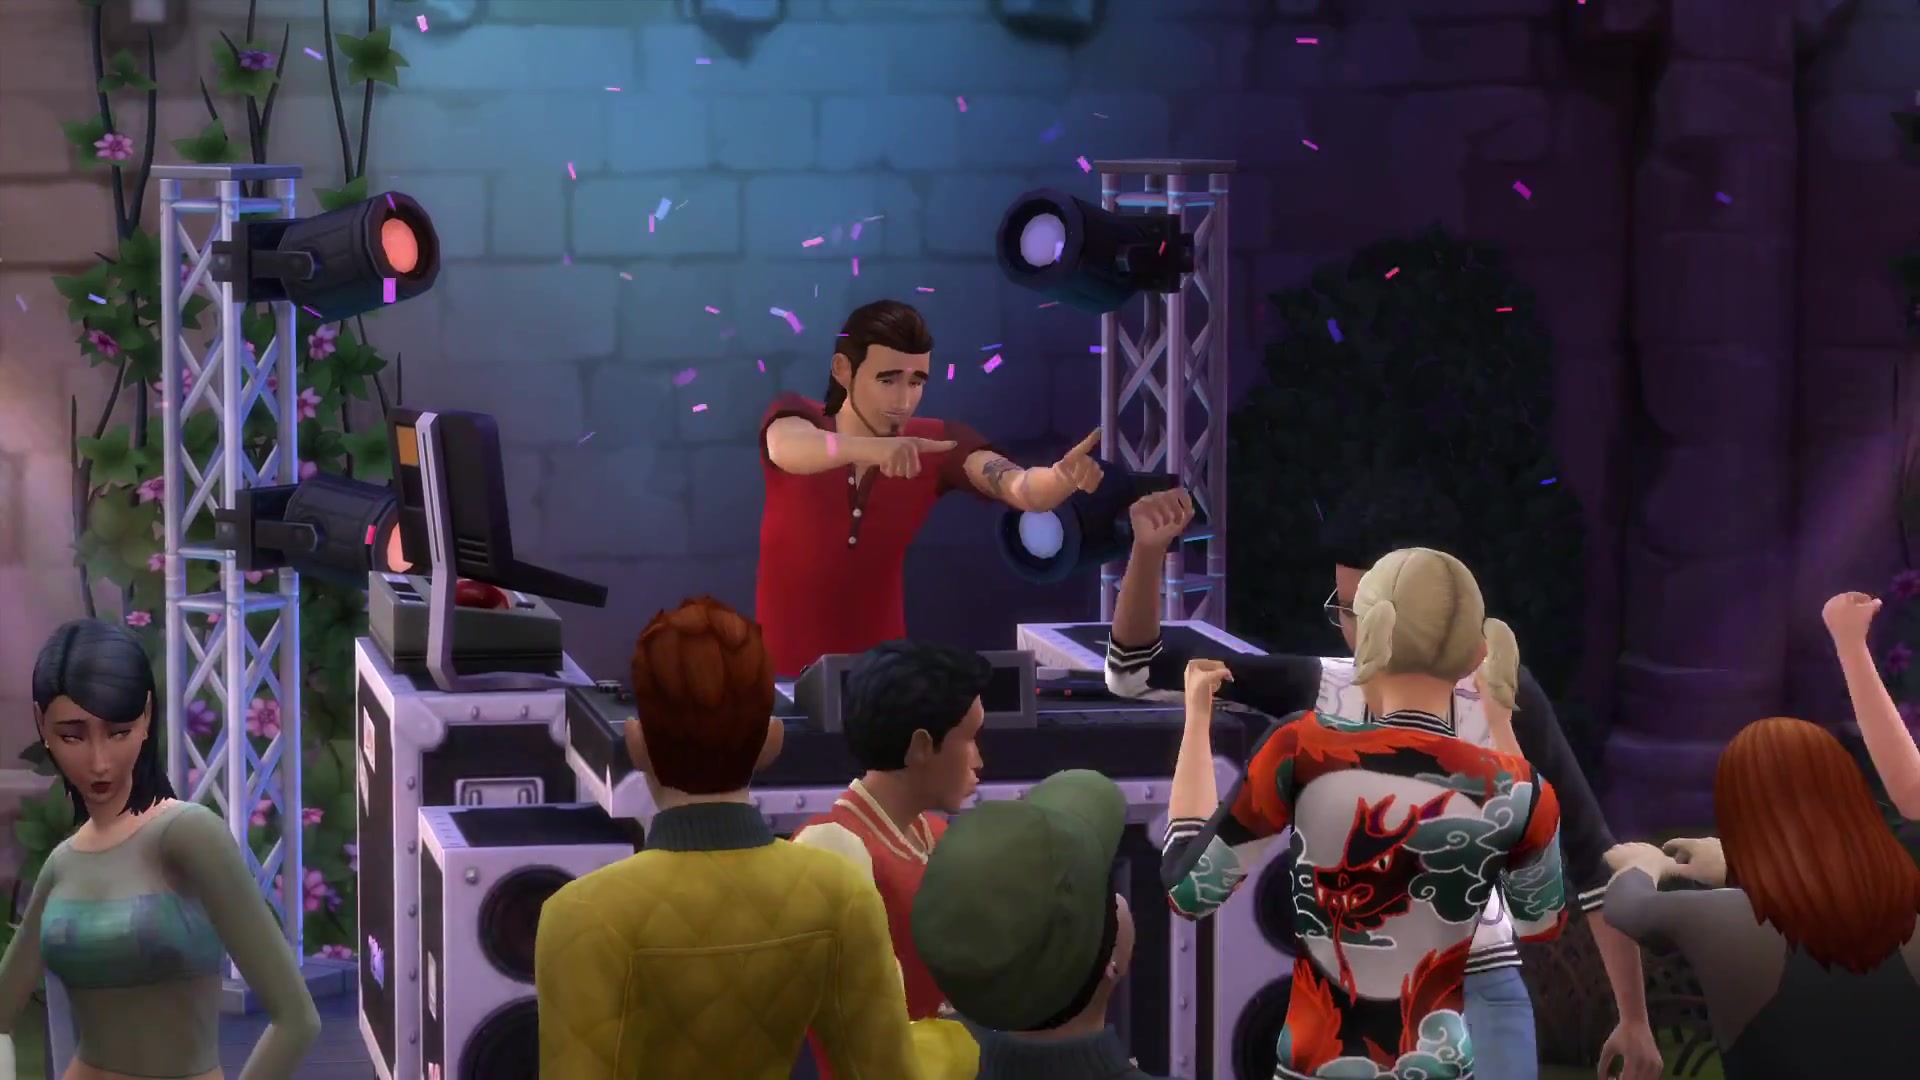 the sims 4 get together features